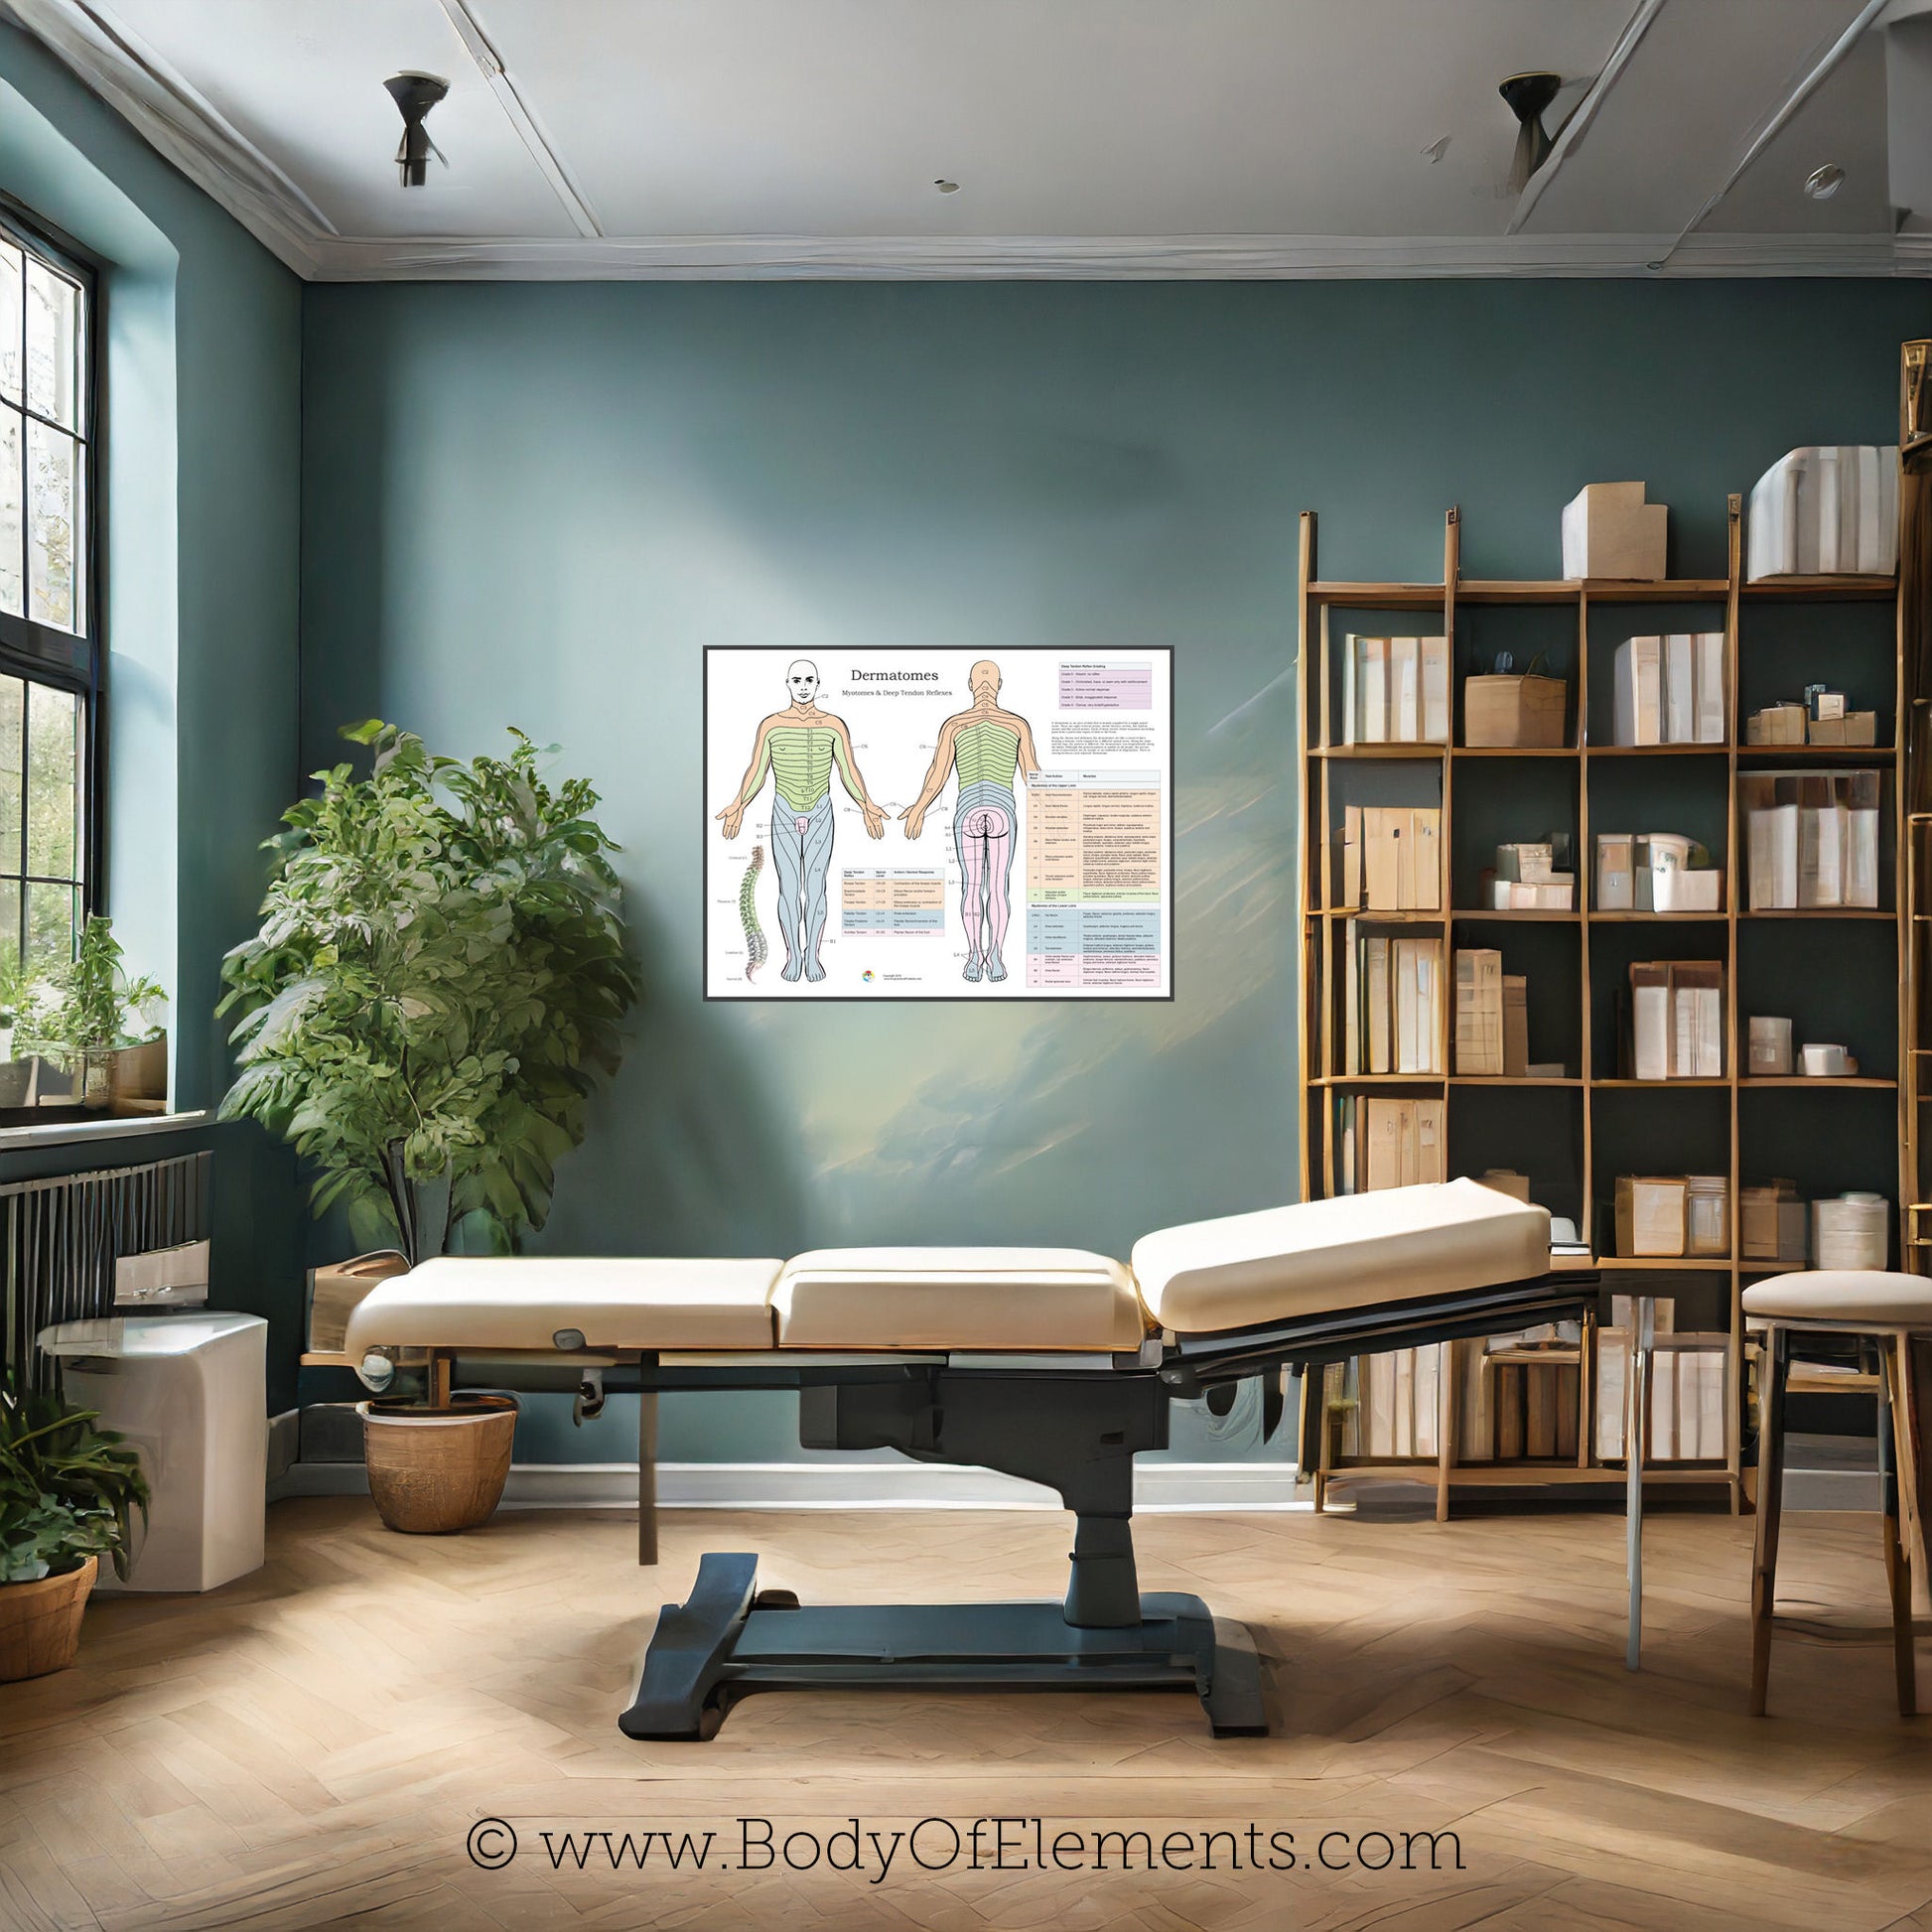 Healthcare clinic dermatomes wall chart